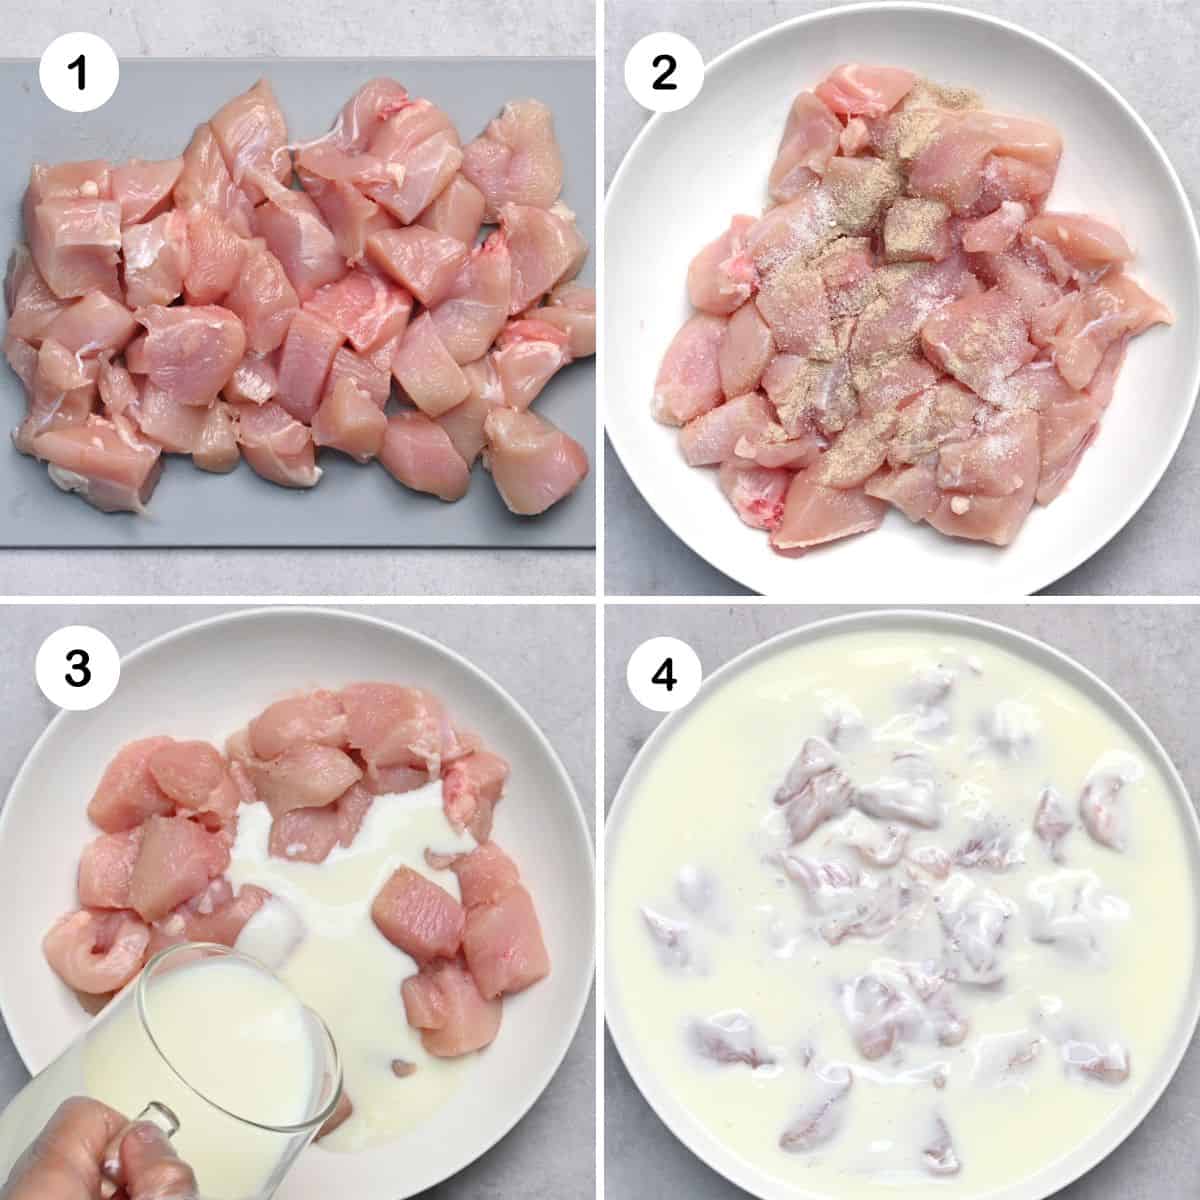 Steps for marinating chicken breasts